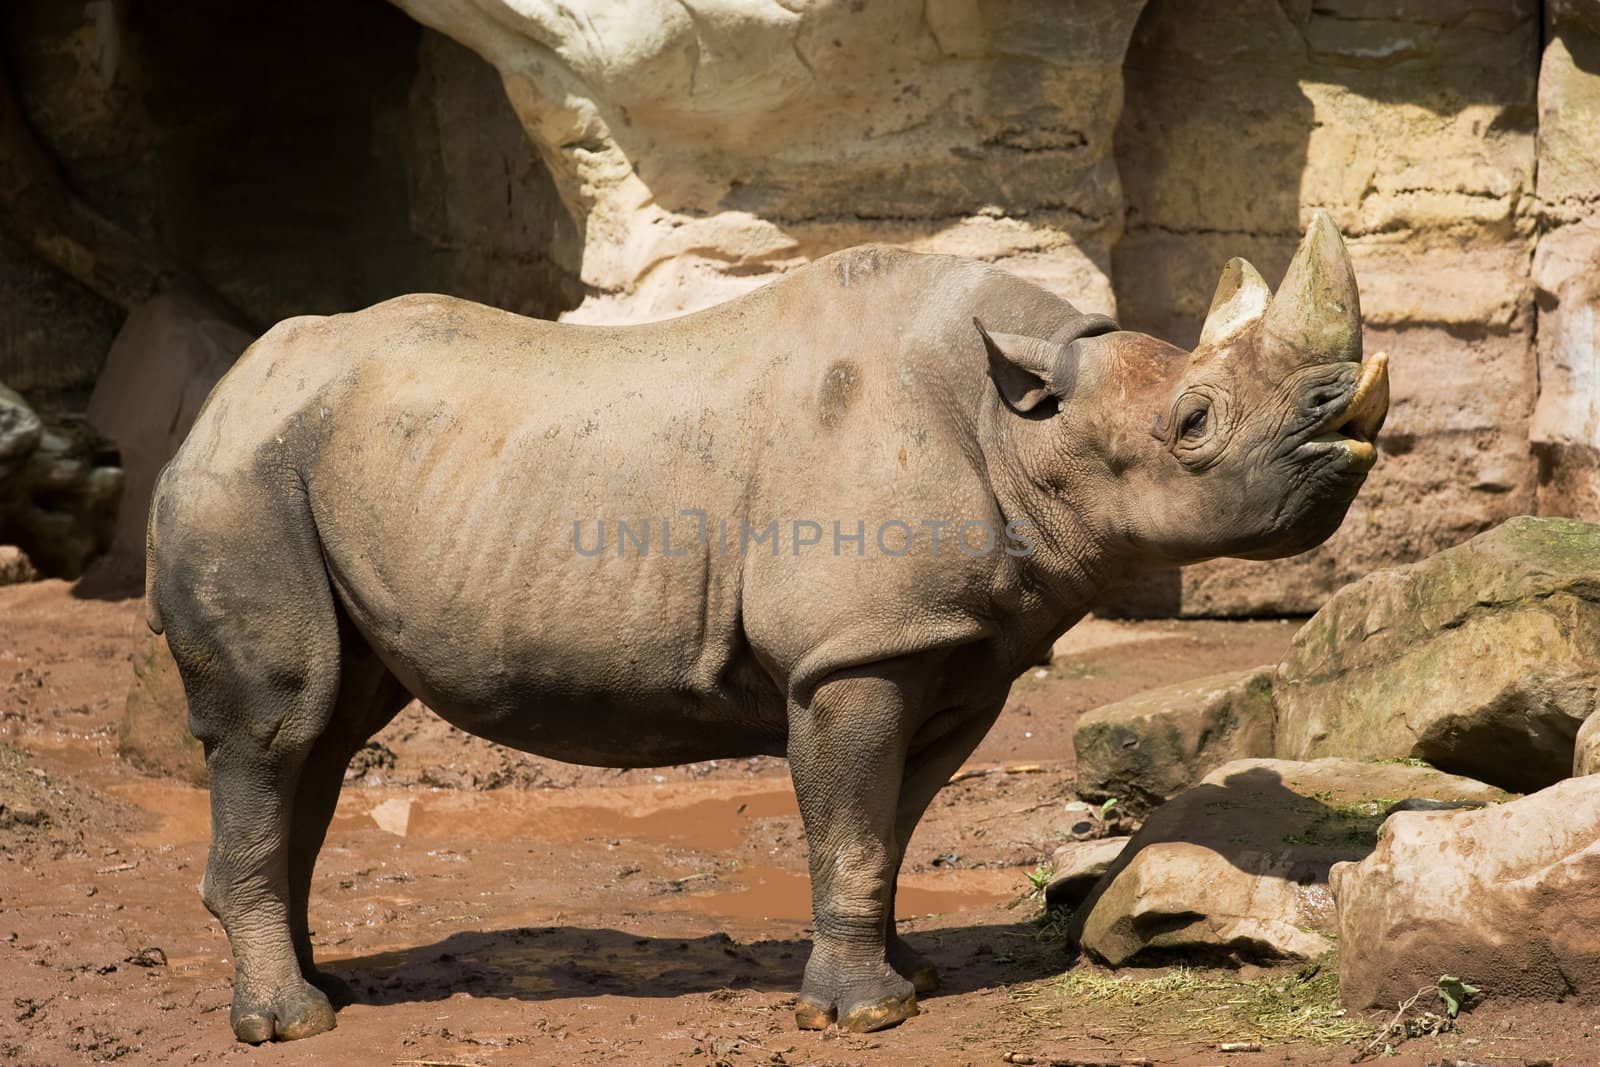 Standing adult Rhinoceros in Zoo. Sunny summer day. Clipping path for rhino included.